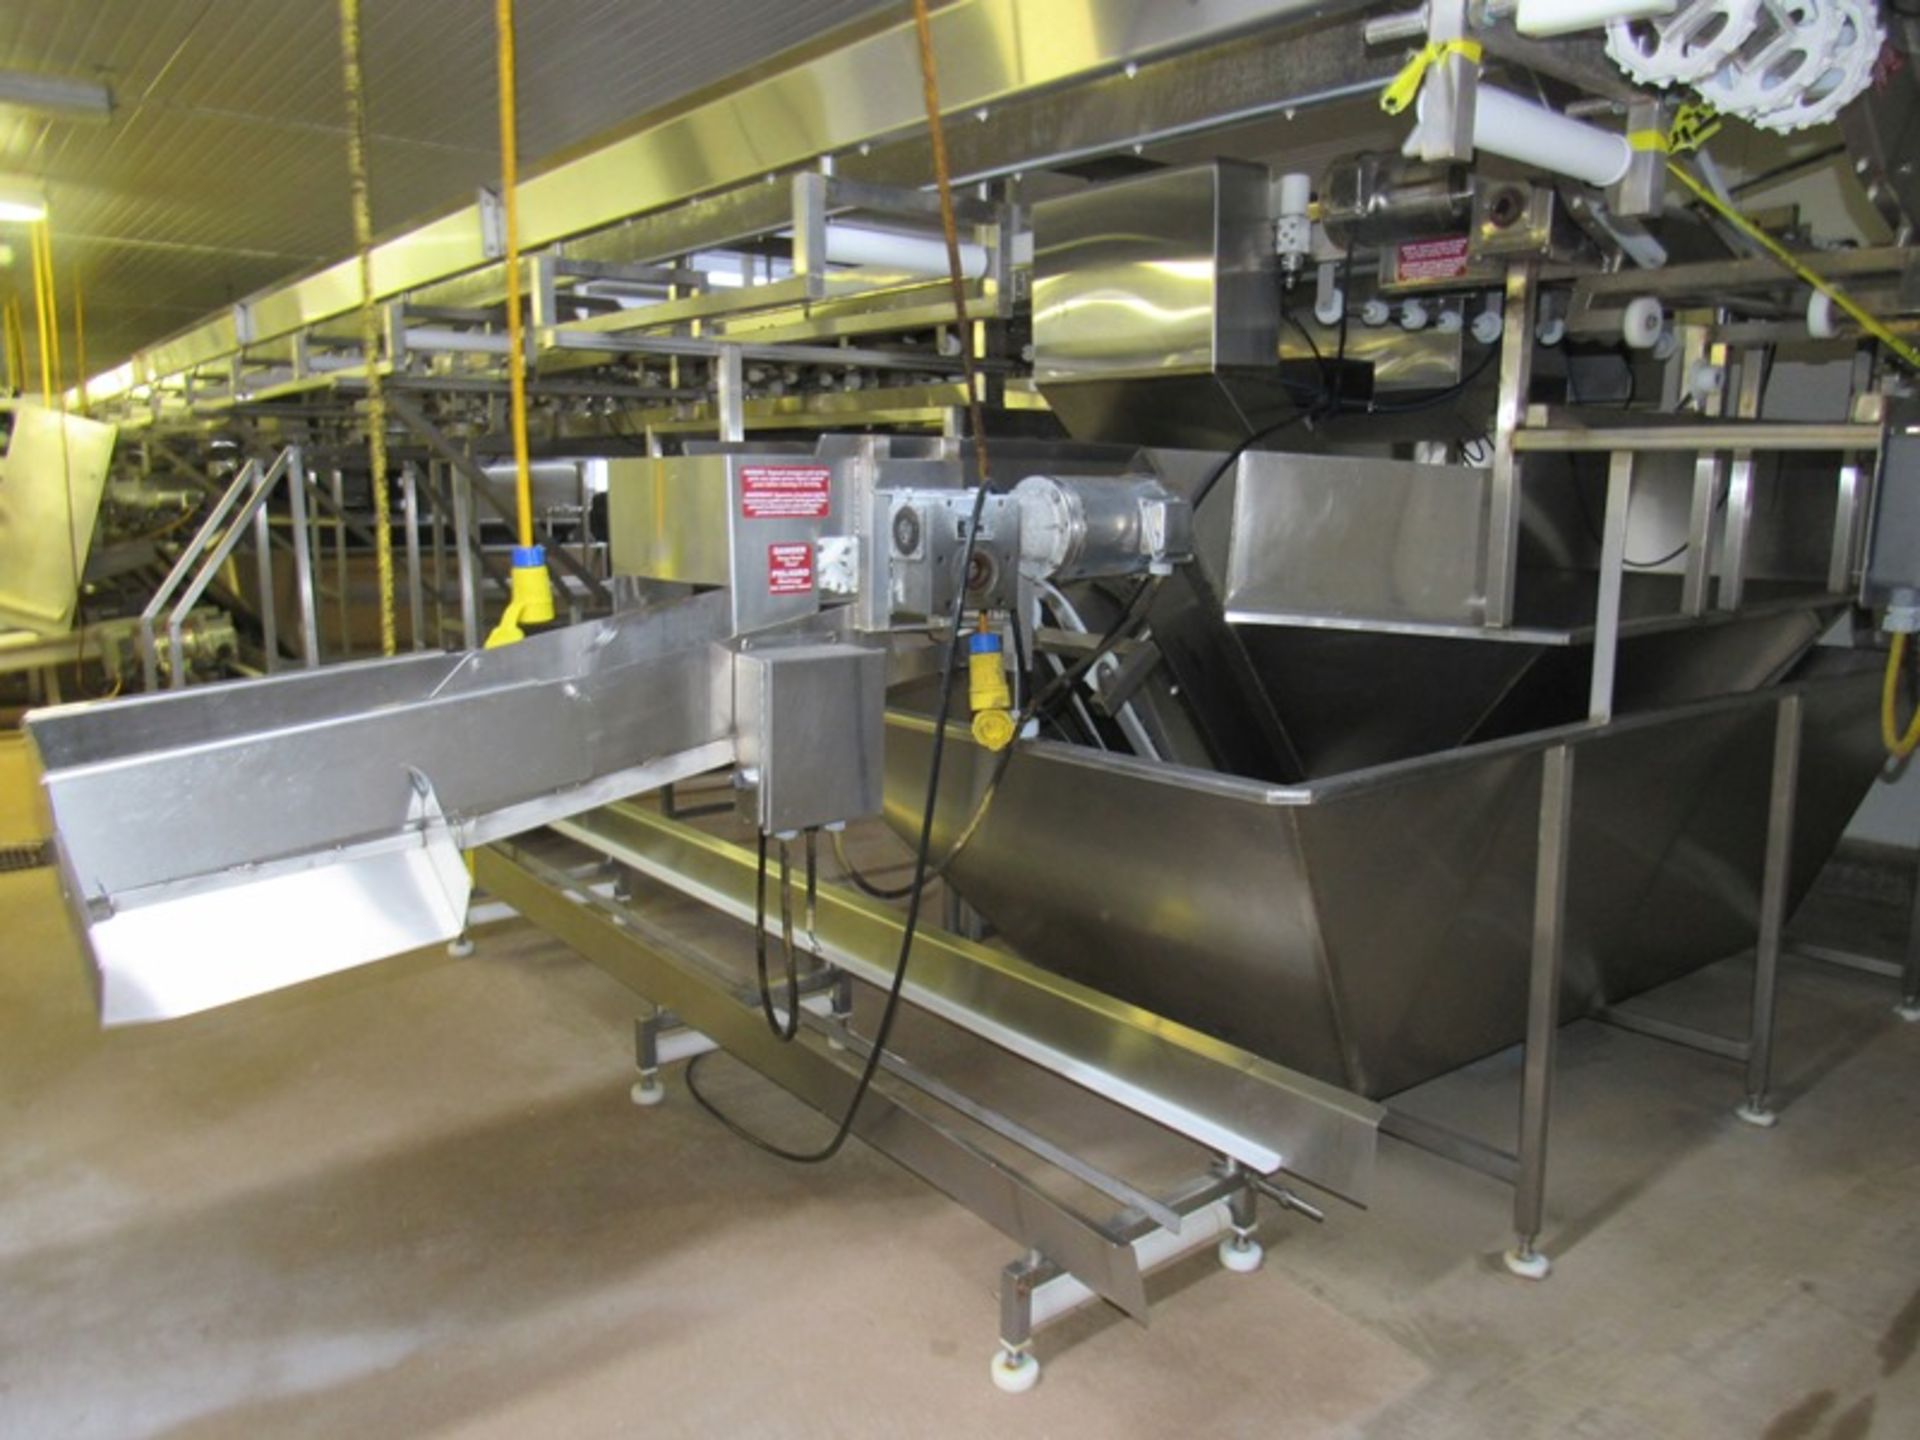 Stainless Steel Tank, 64" W X 112" L X 3' D with 16" W X 6' L incline conveyor (no belt), 1 h.p., - Image 3 of 4